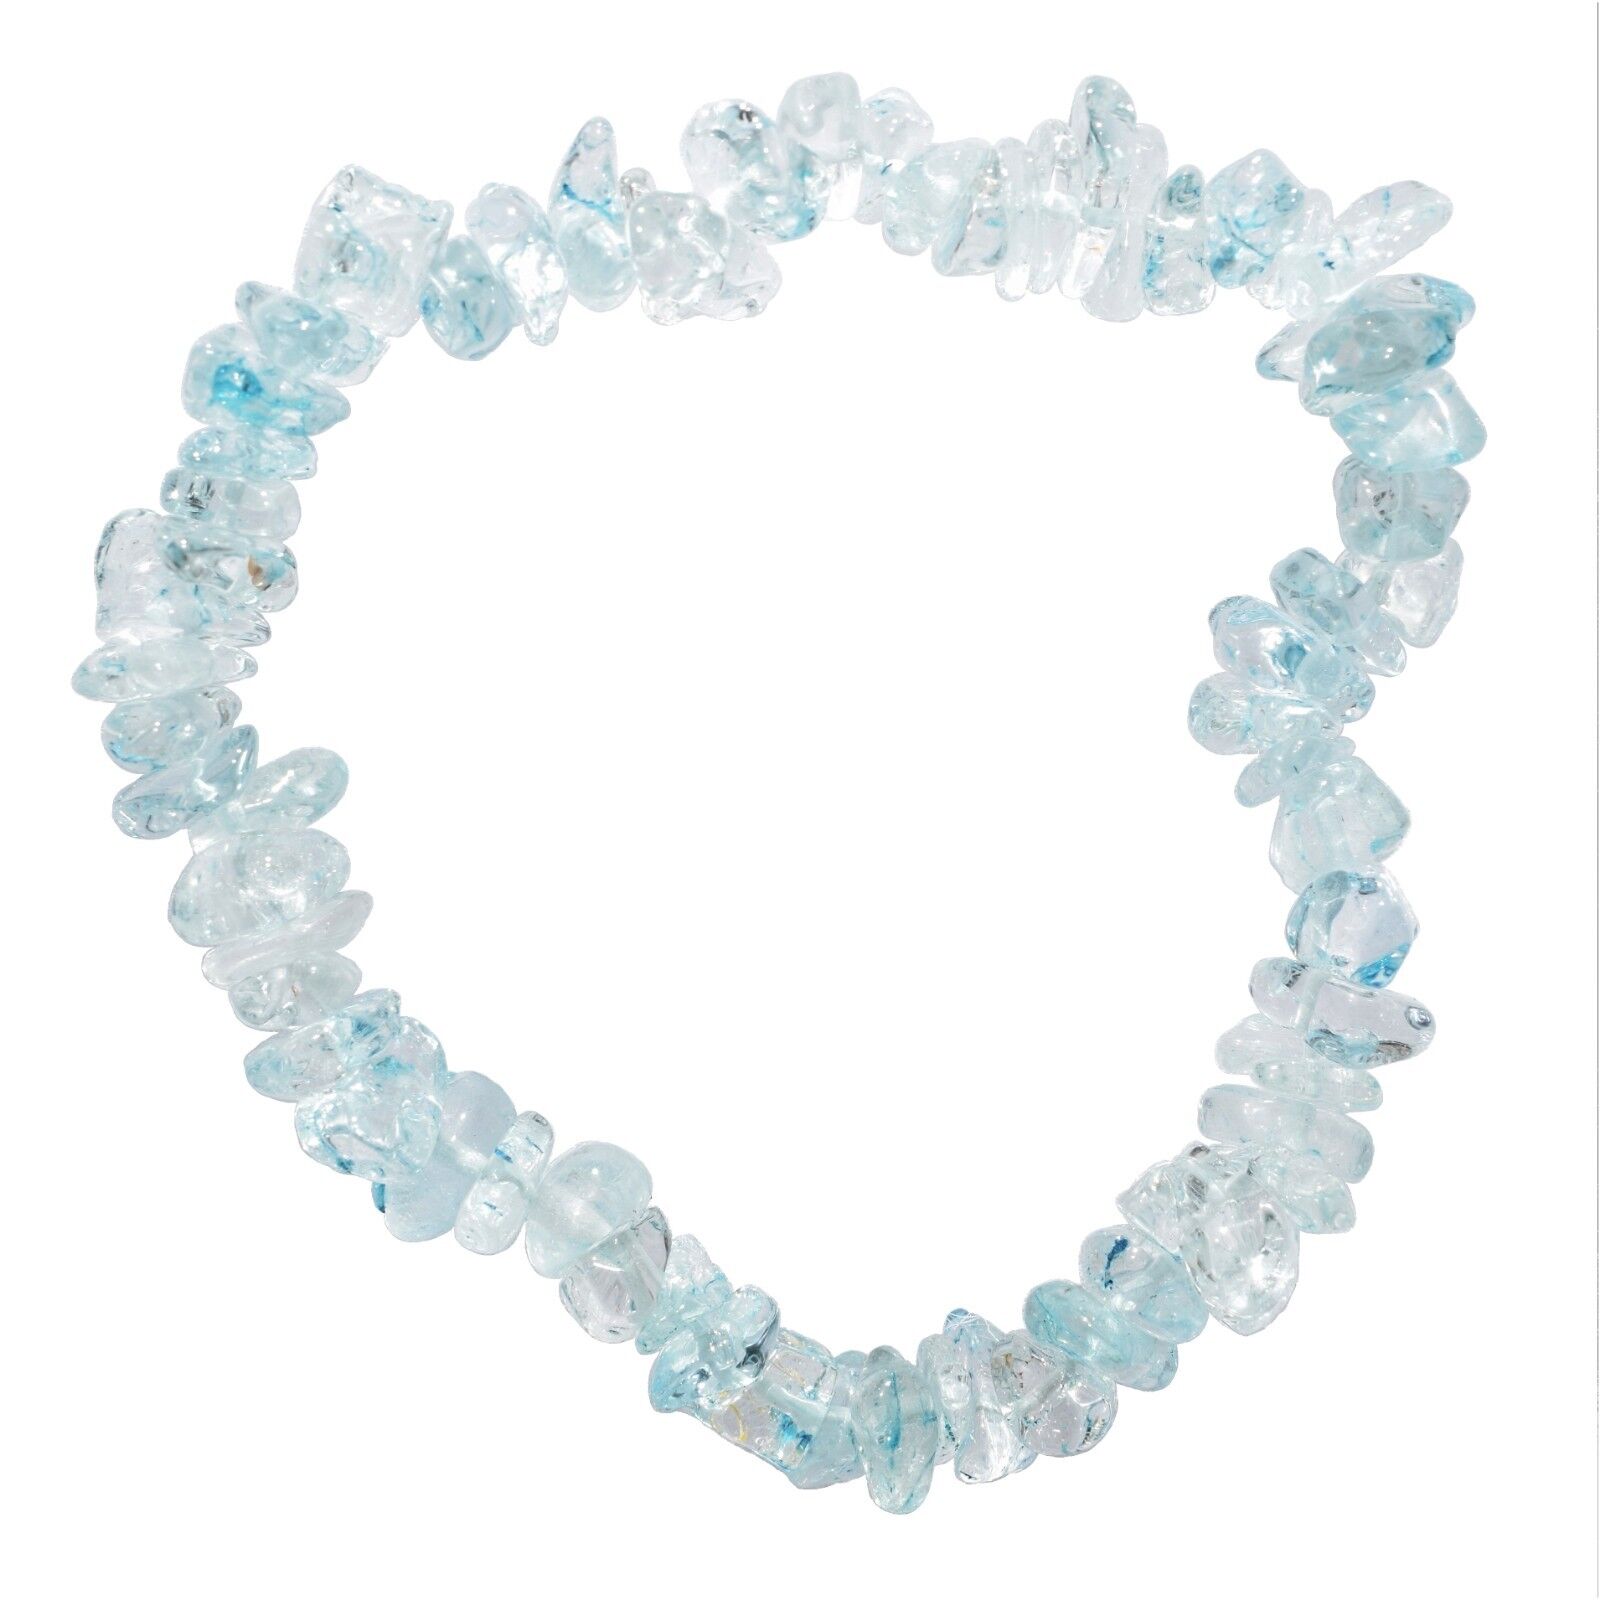 CHARGED Blue Topaz Crystal Chip Stretchy Bracelet + Bay Selenite Puffy Heart